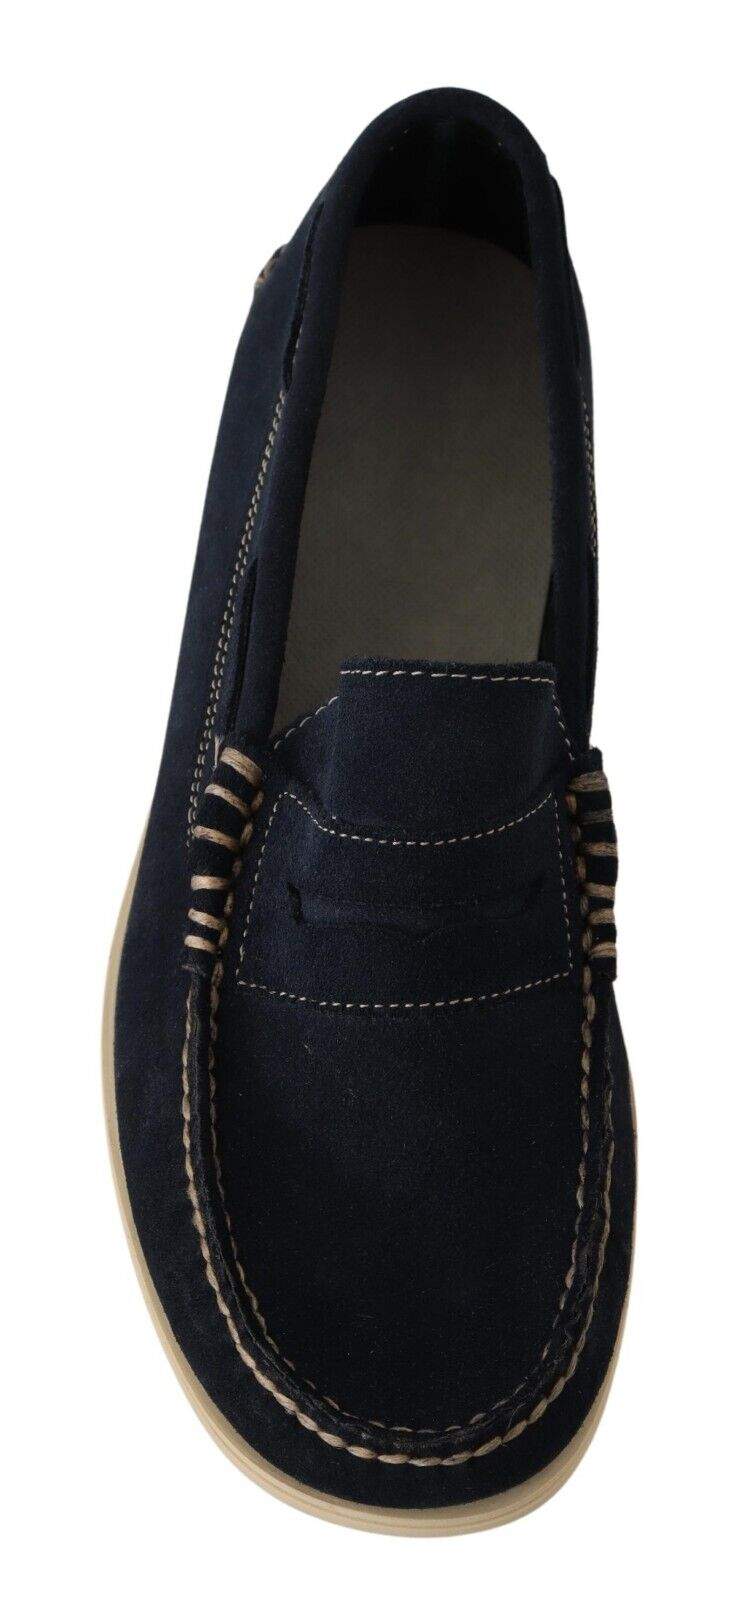 POLLINI Blue Suede Low Top Mocassin Loafers #men, Blue, EU40/US7, feed-1, Loafers - Men - Shoes, POLLINI at SEYMAYKA